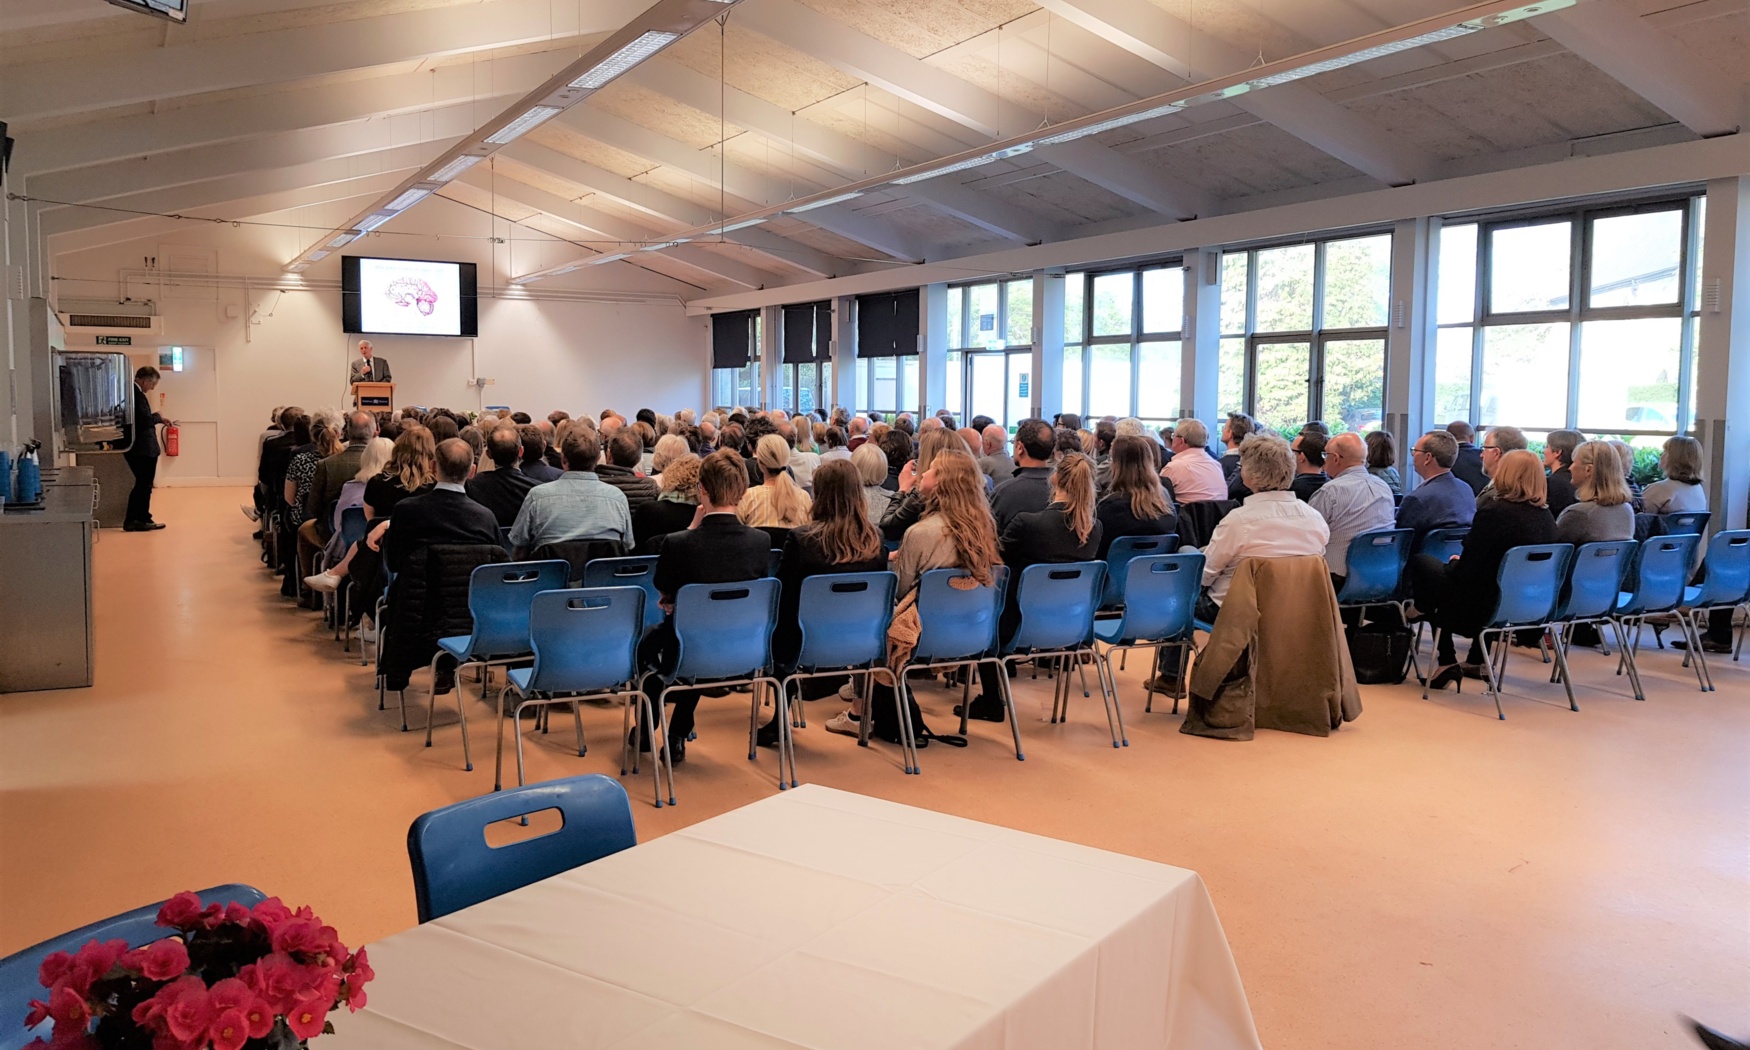 2019APR30 - Cambs Soc lecture, refectory.jpg